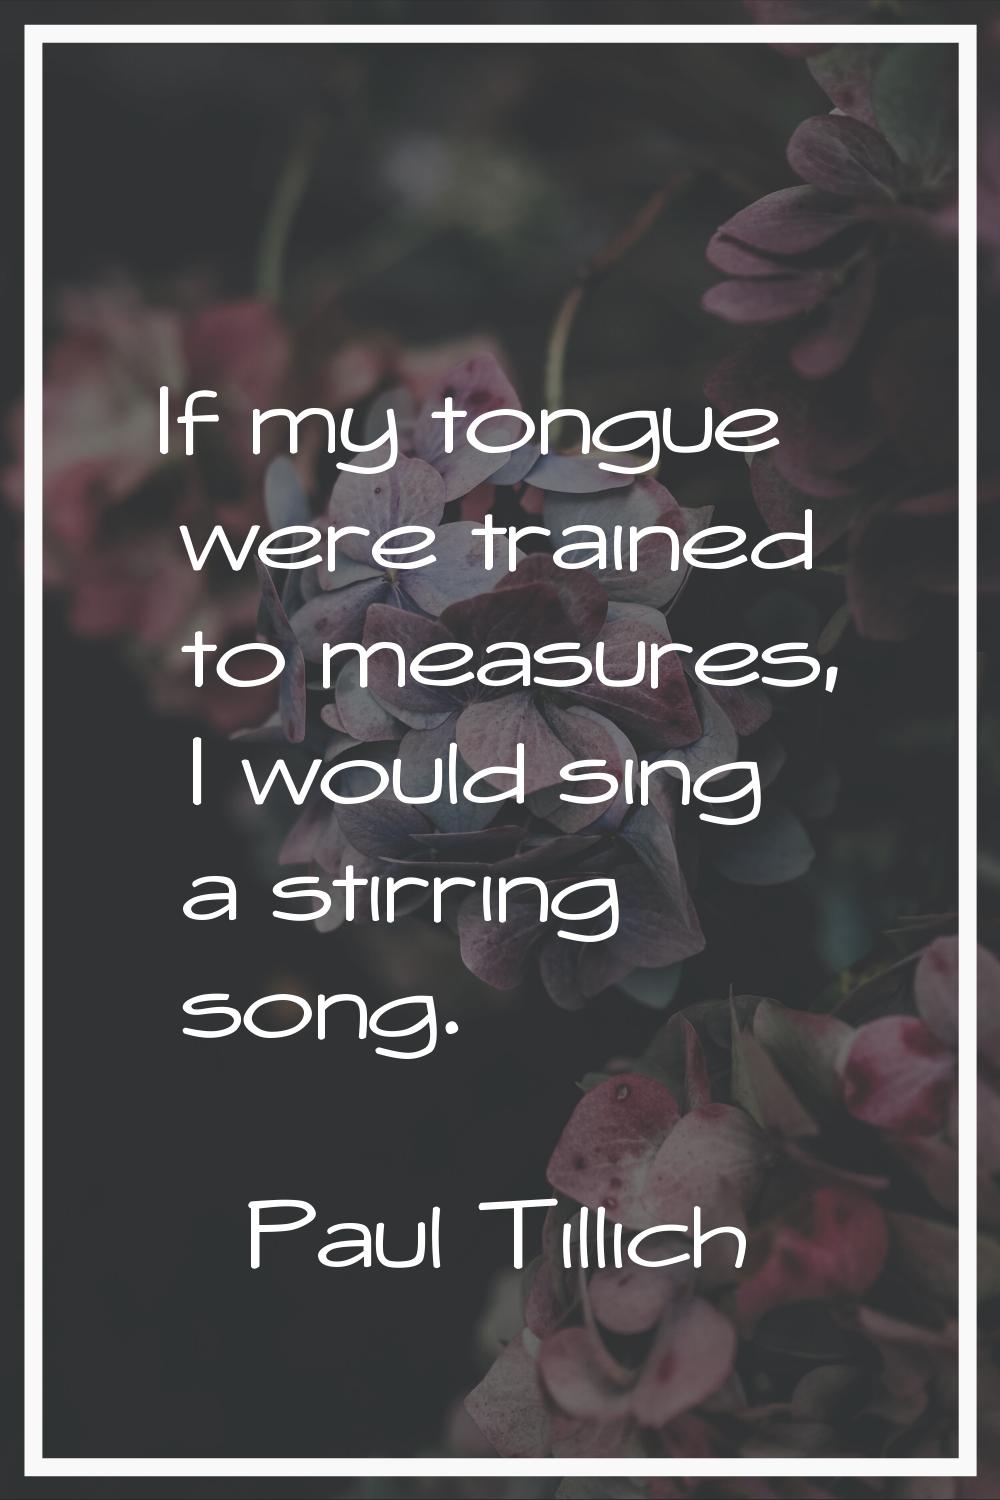 If my tongue were trained to measures, I would sing a stirring song.